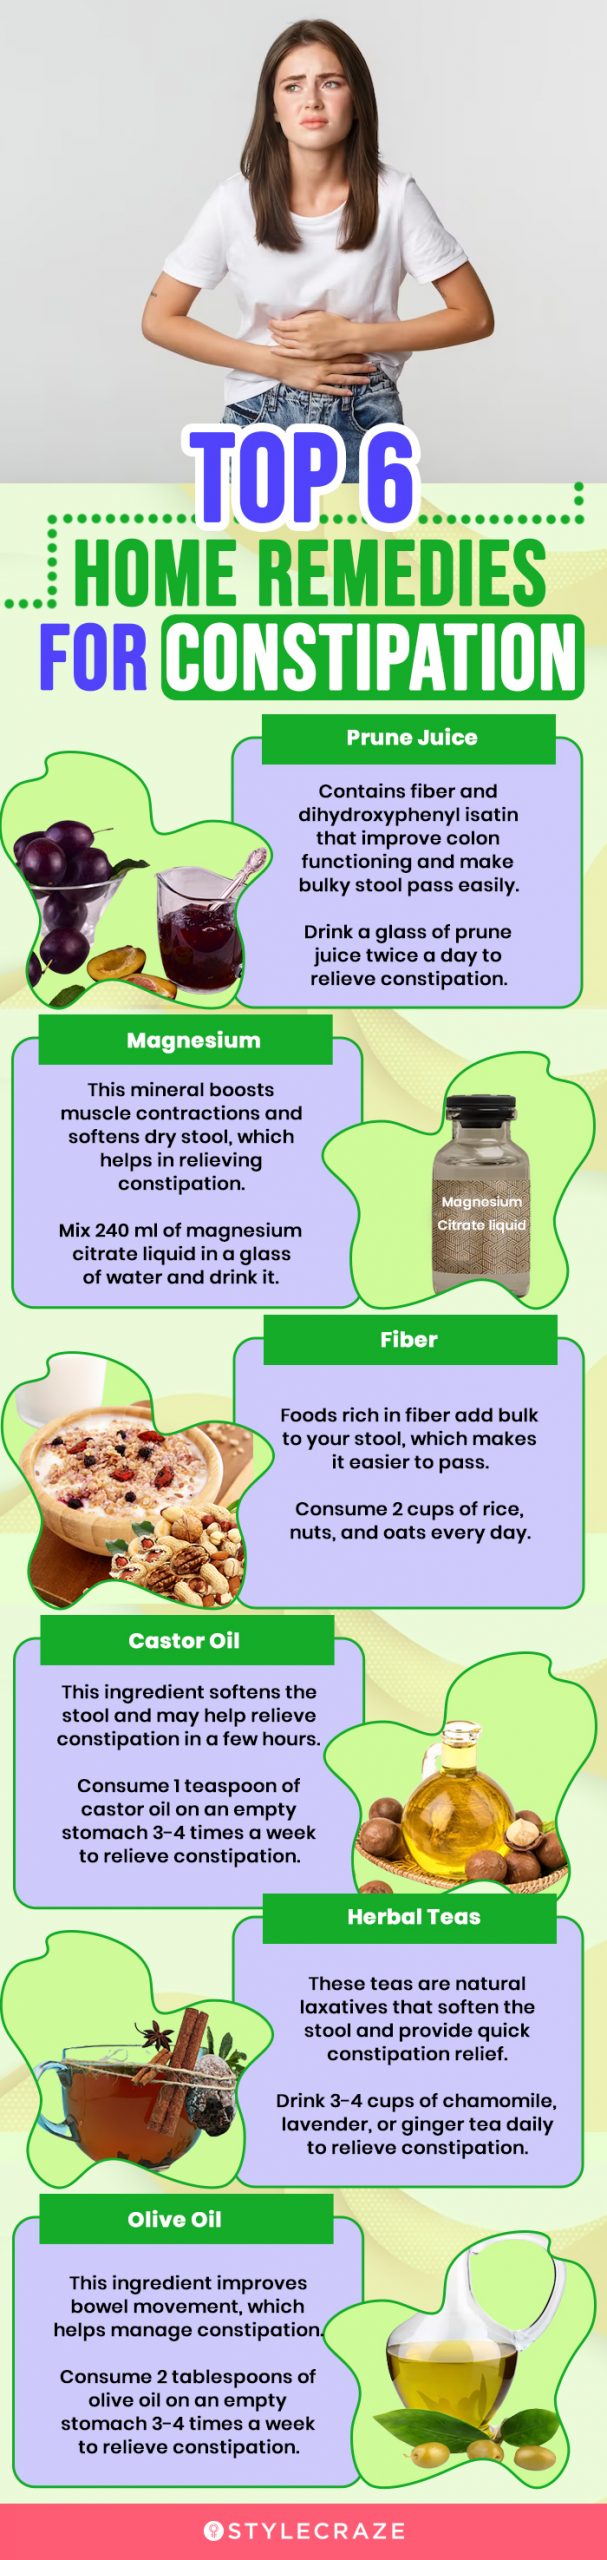 top 6 home remedies for constipation (infographic)